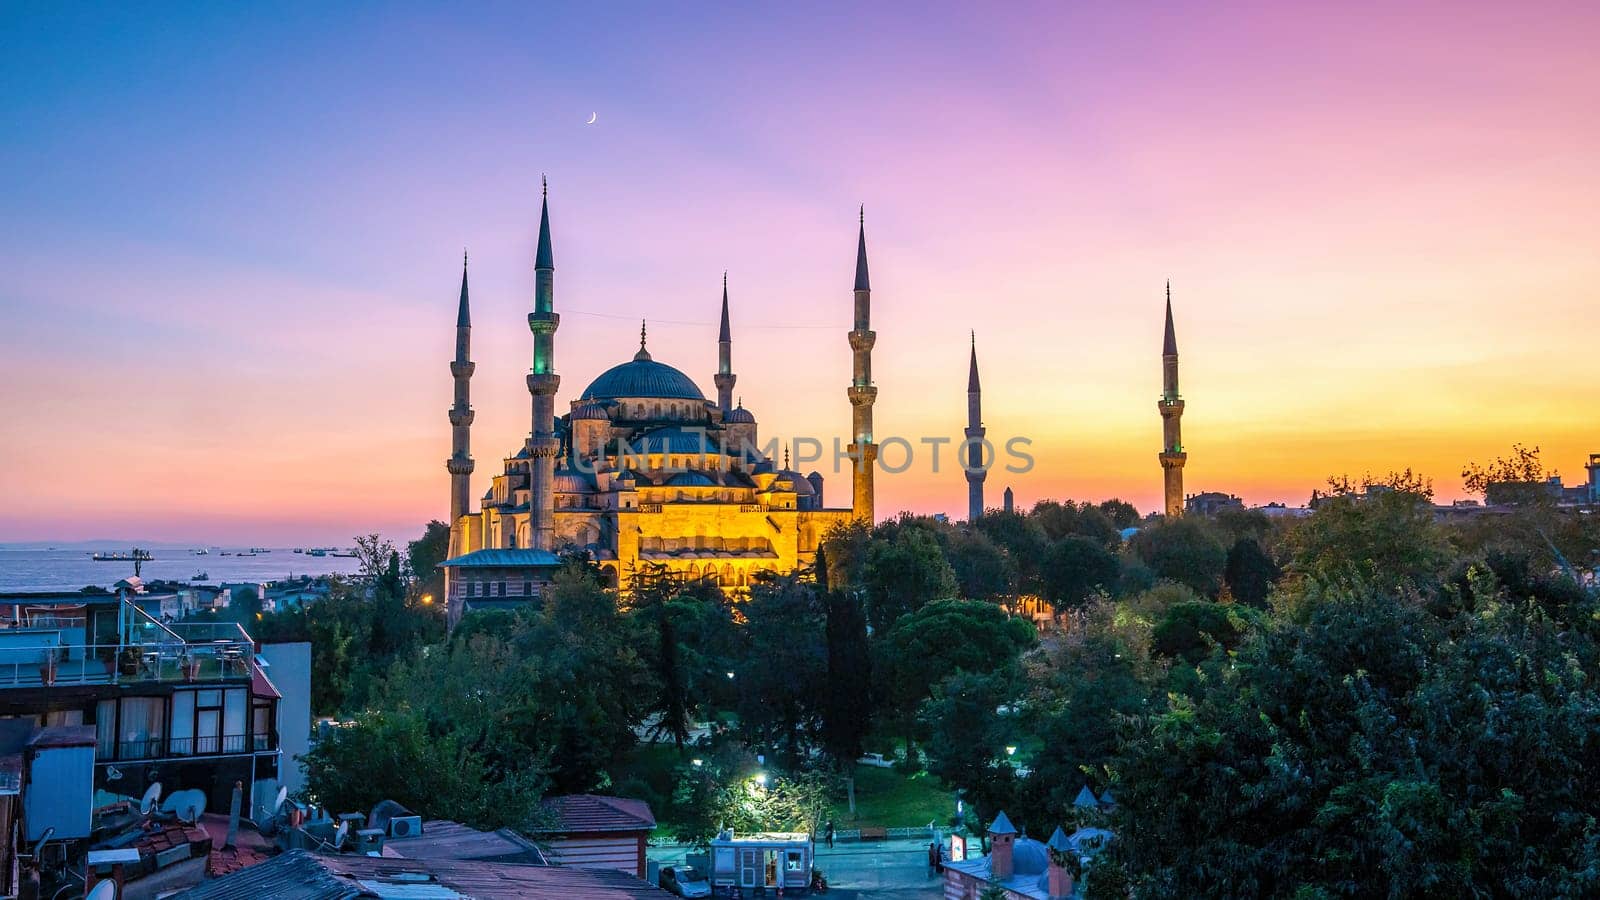 The Sultanahmet Mosque (Blue Mosque) in Istanbul, Turkey by f11photo